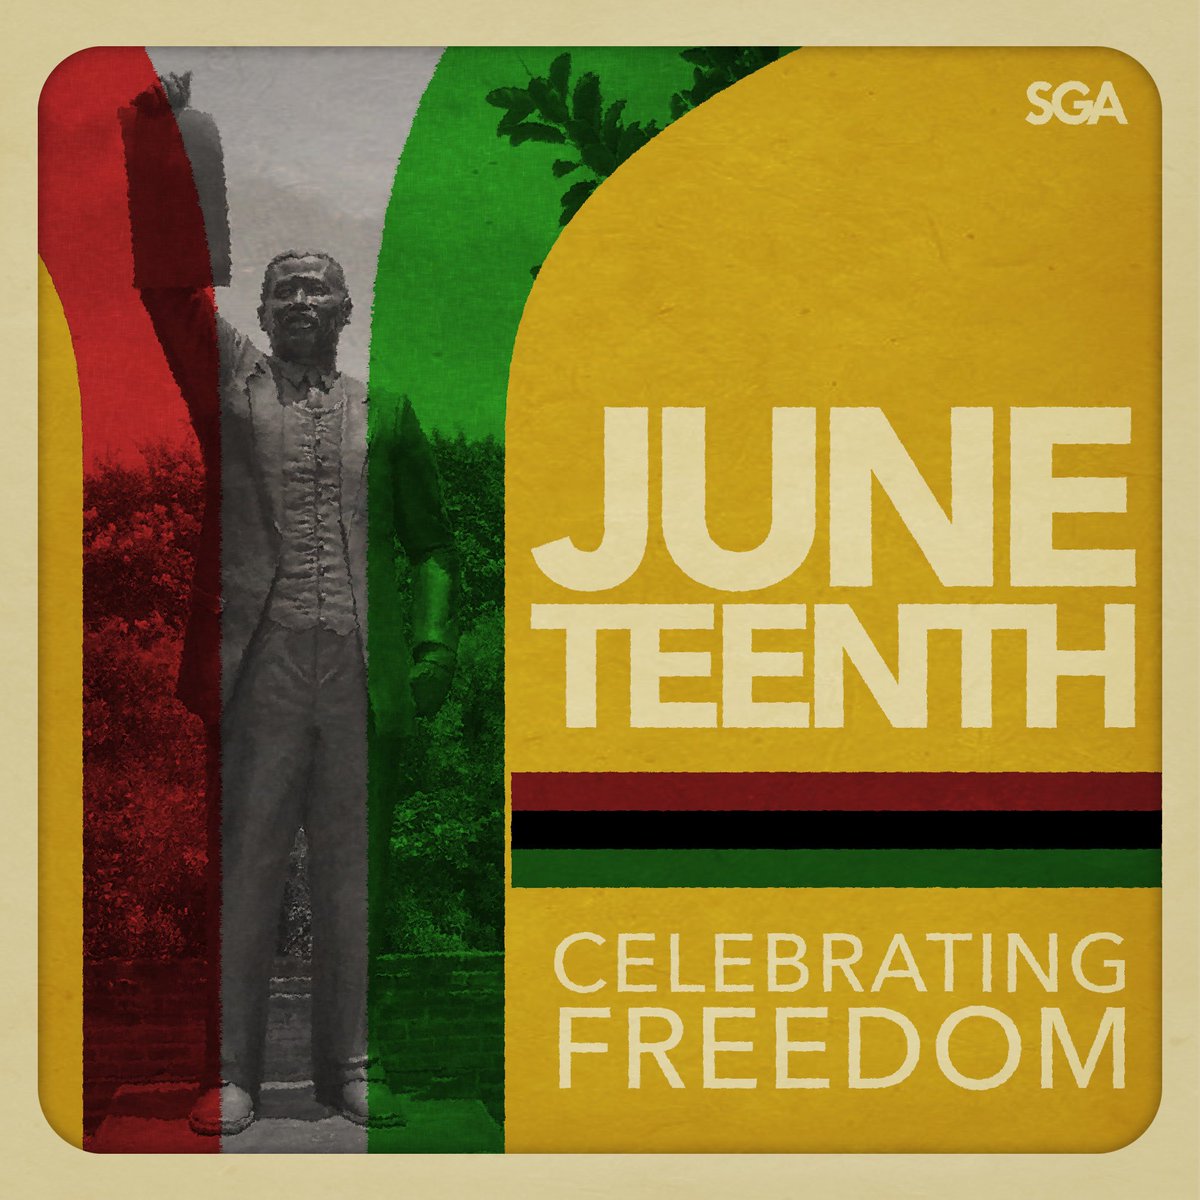 A Celebration of Freedom for All. On June 19th, 1865; news of emancipation reached the Texas city of Galveston. And as that good news spread, we began the lengthy journey of establishing freedom and equality for all. #juneteenth #freedomday